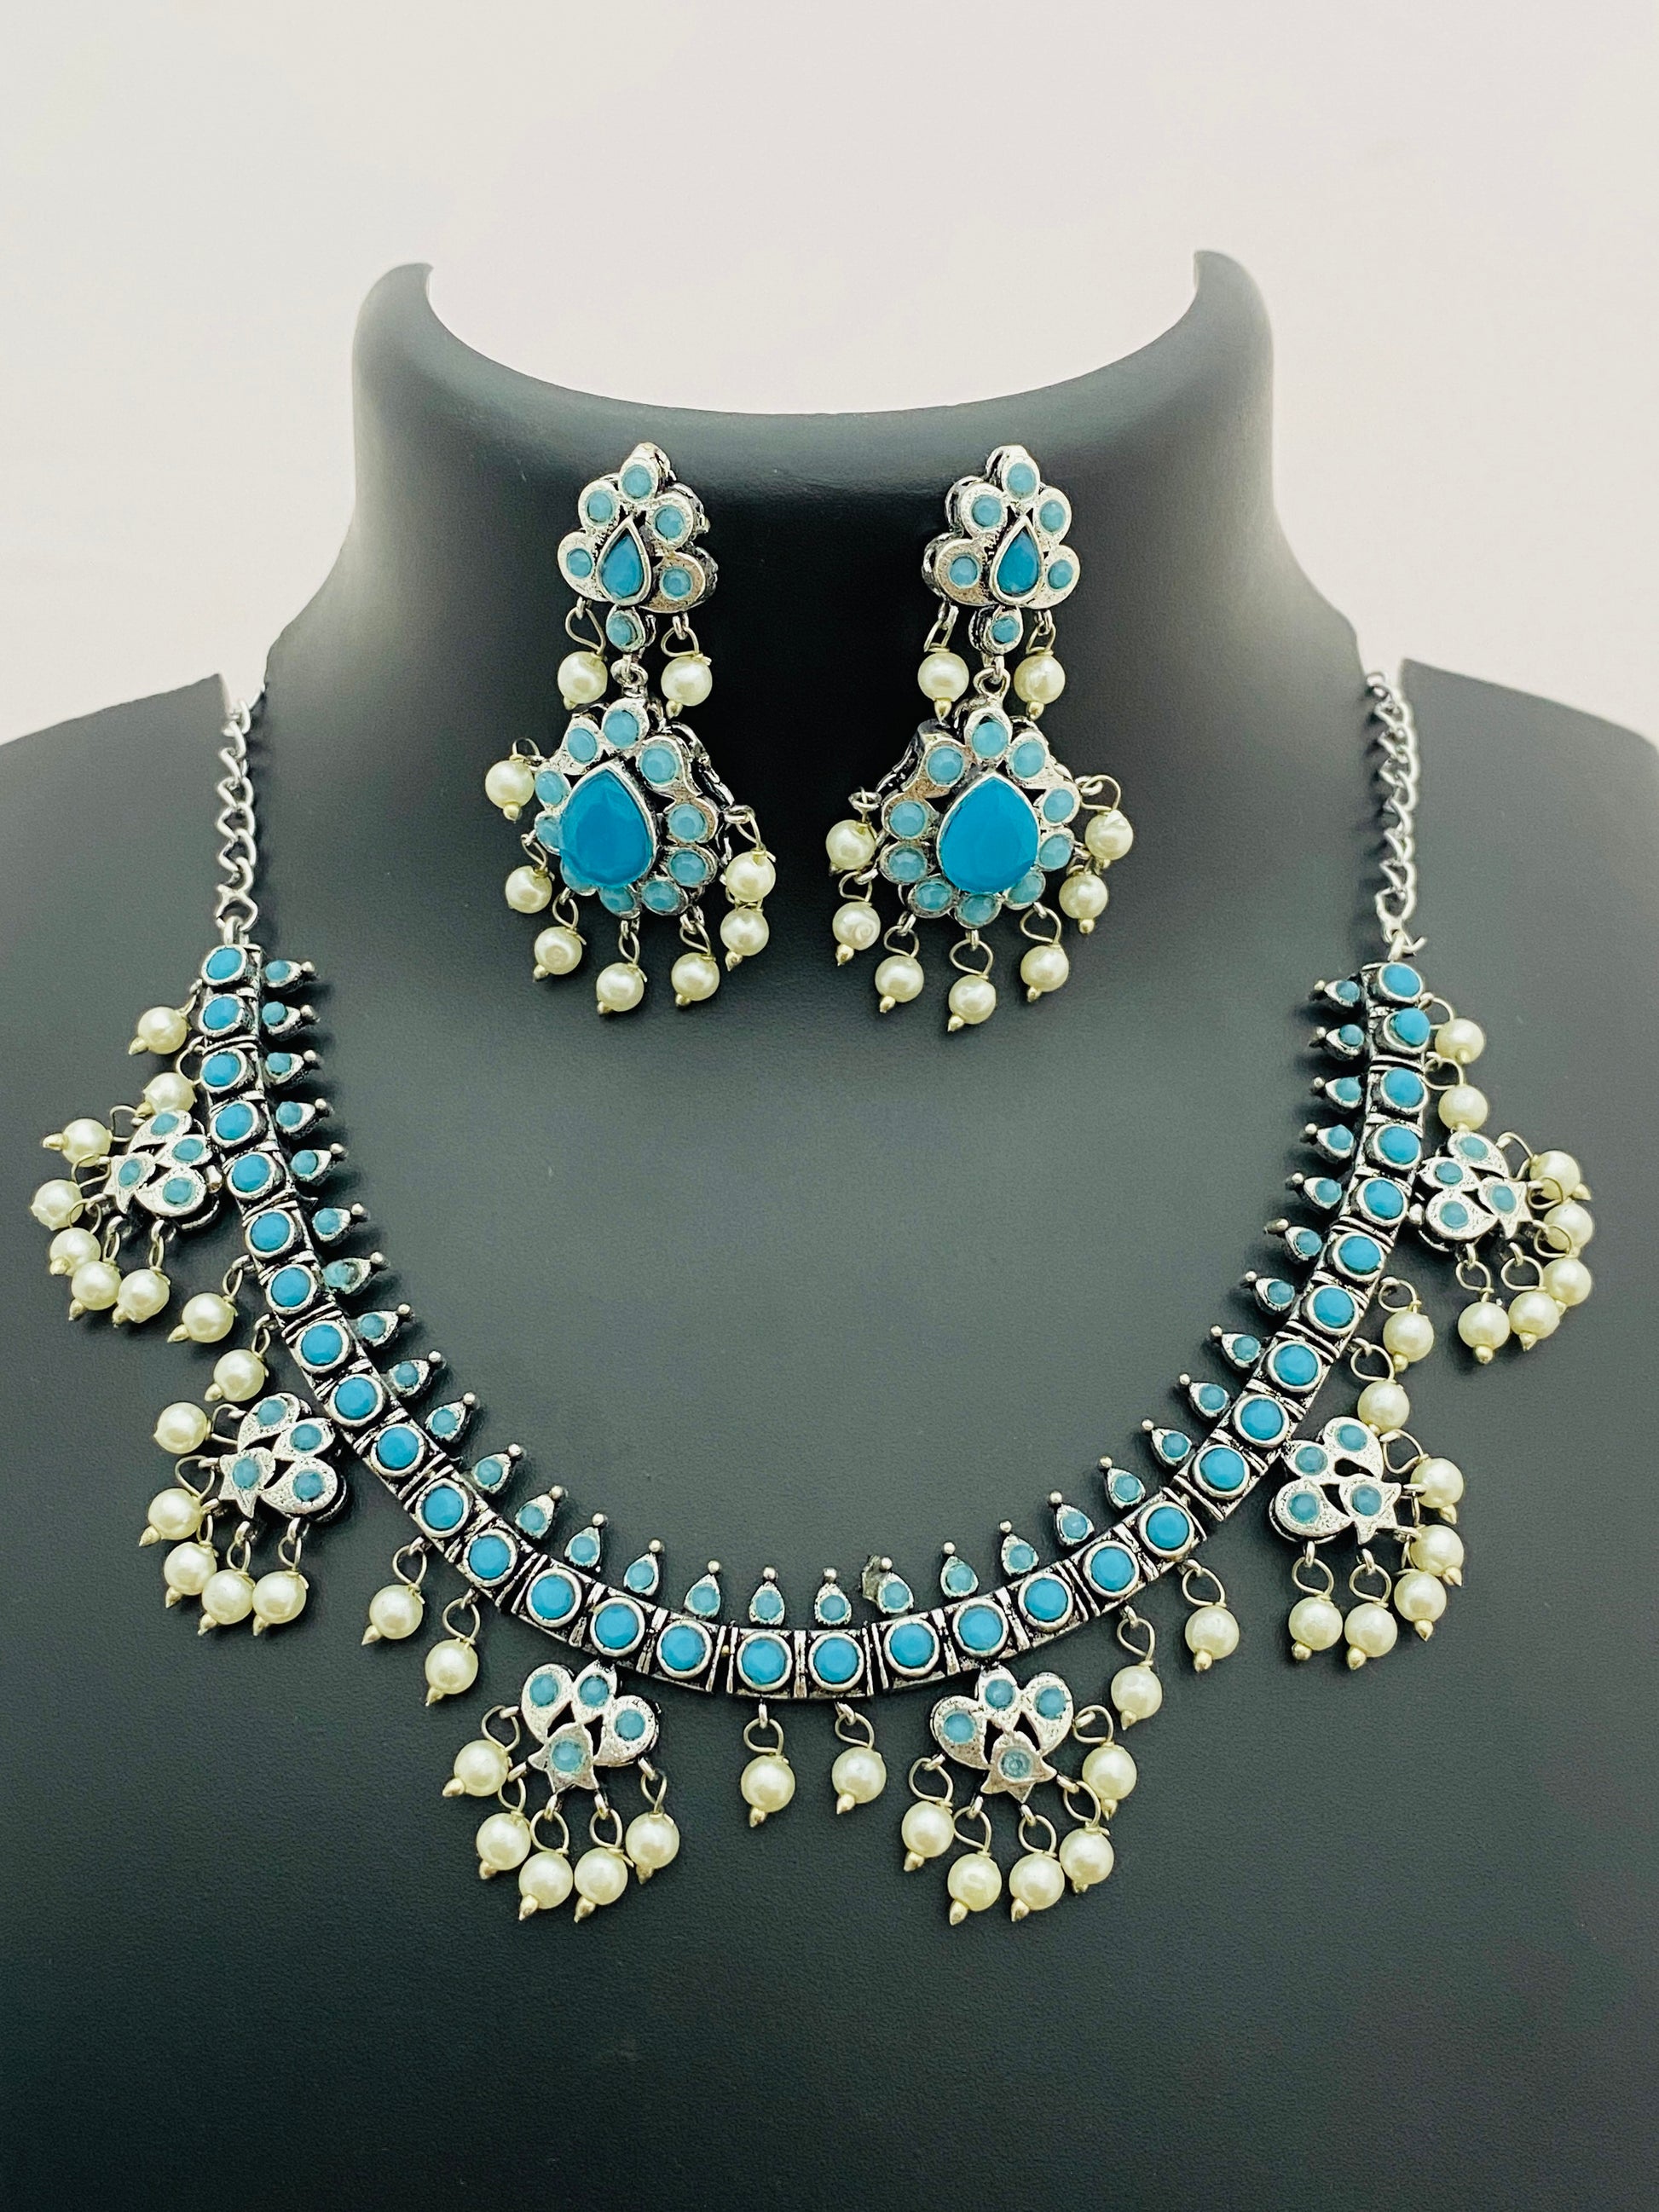 Delightful Turquoise Blue Floral Designed Silver Toned Oxidized Short Necklace With Earrings